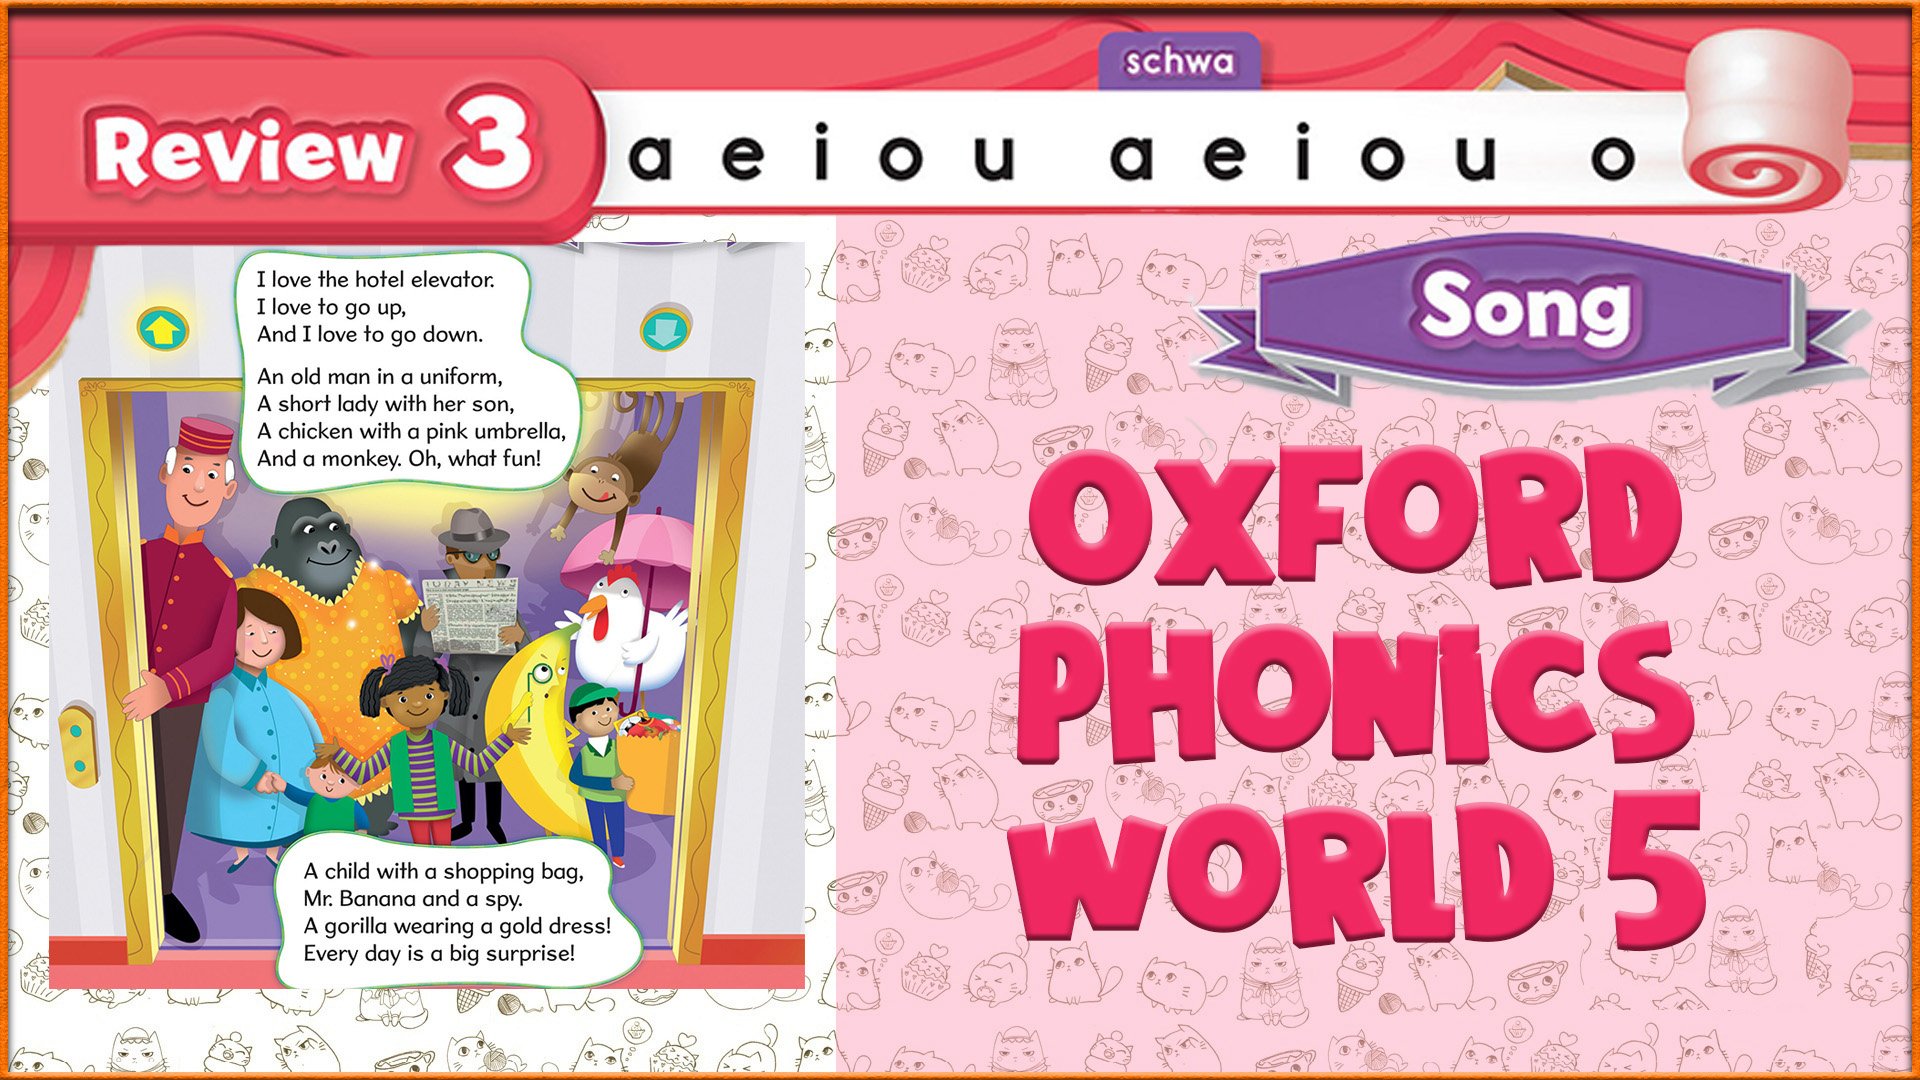 Song | Review 3 | Oxford Phonics World 5 - Consonant Blends. #43